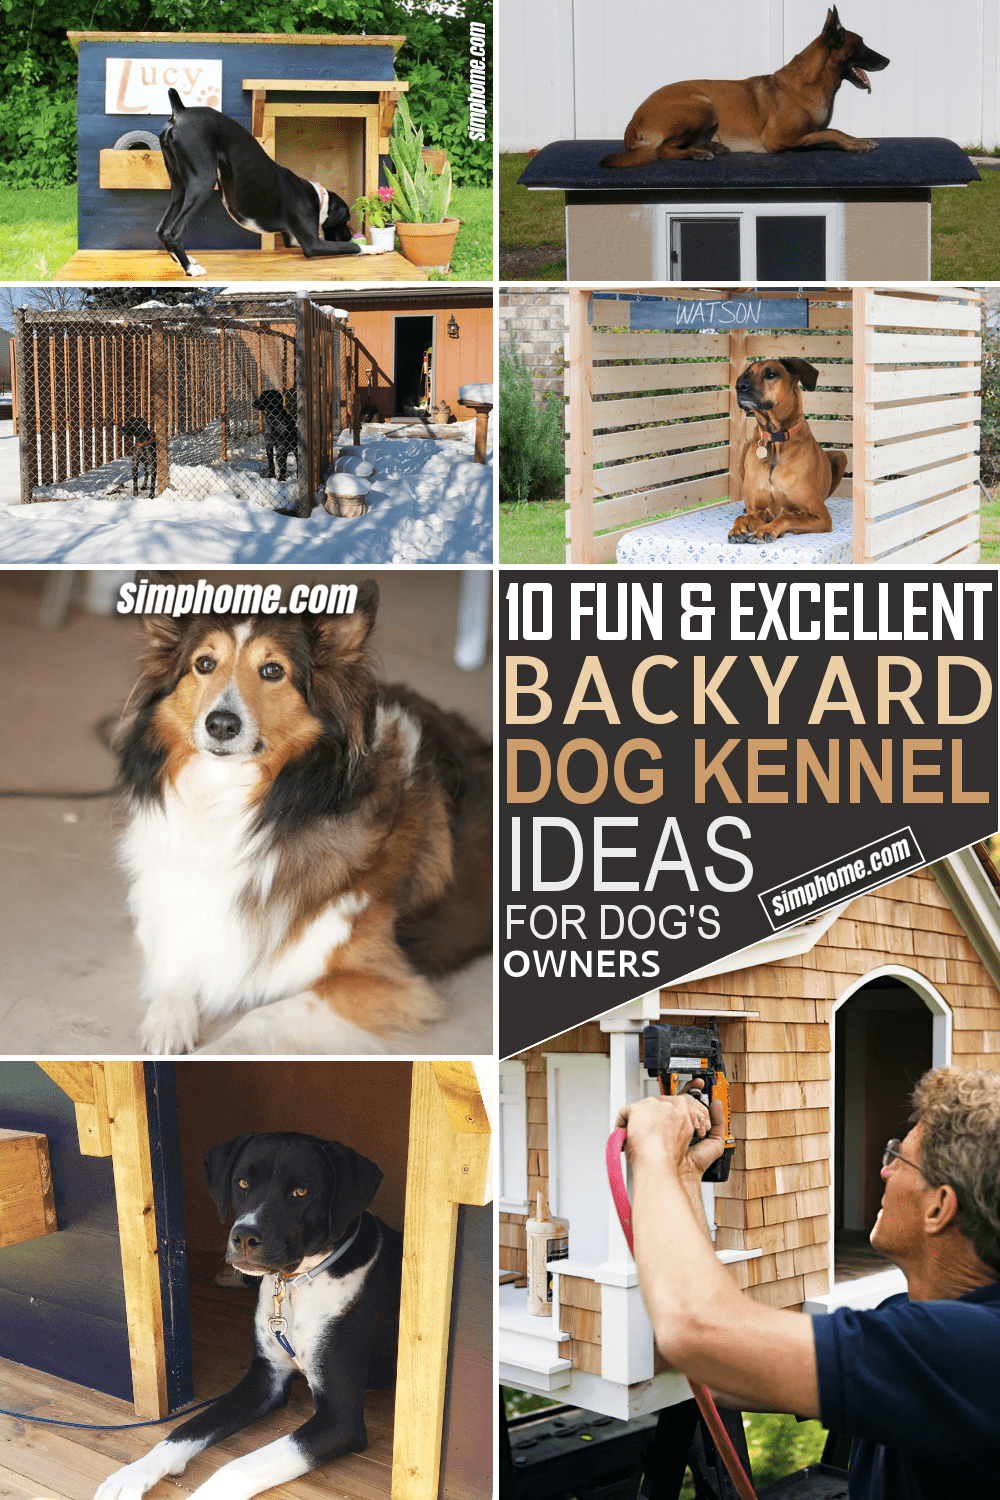 How to Build Backyard Dog Kennel Ideas by Simphome.com Featured Image